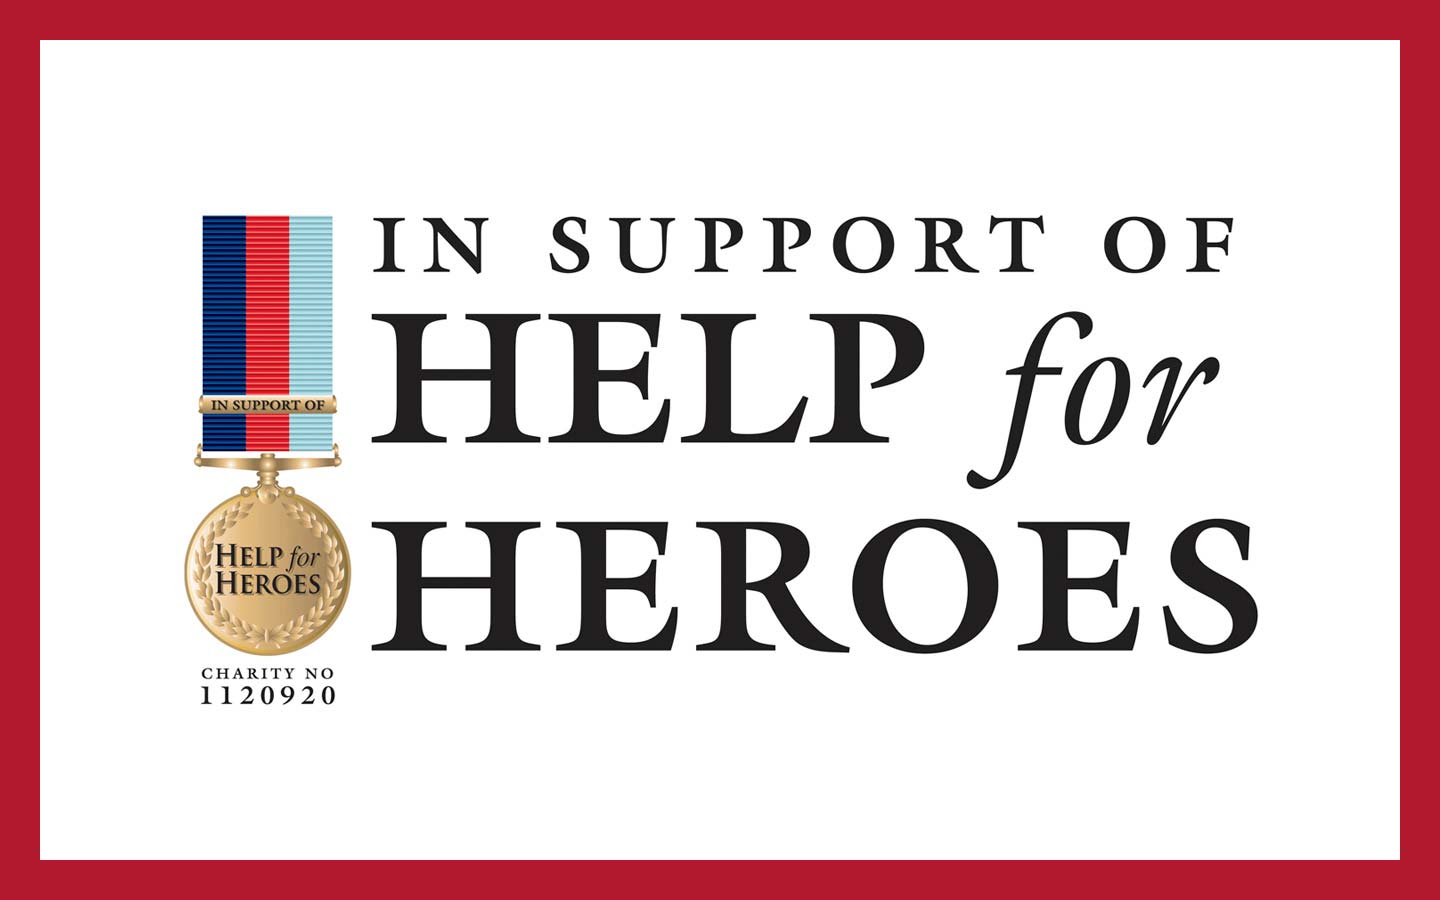 Armed Forces - Help for Heroes